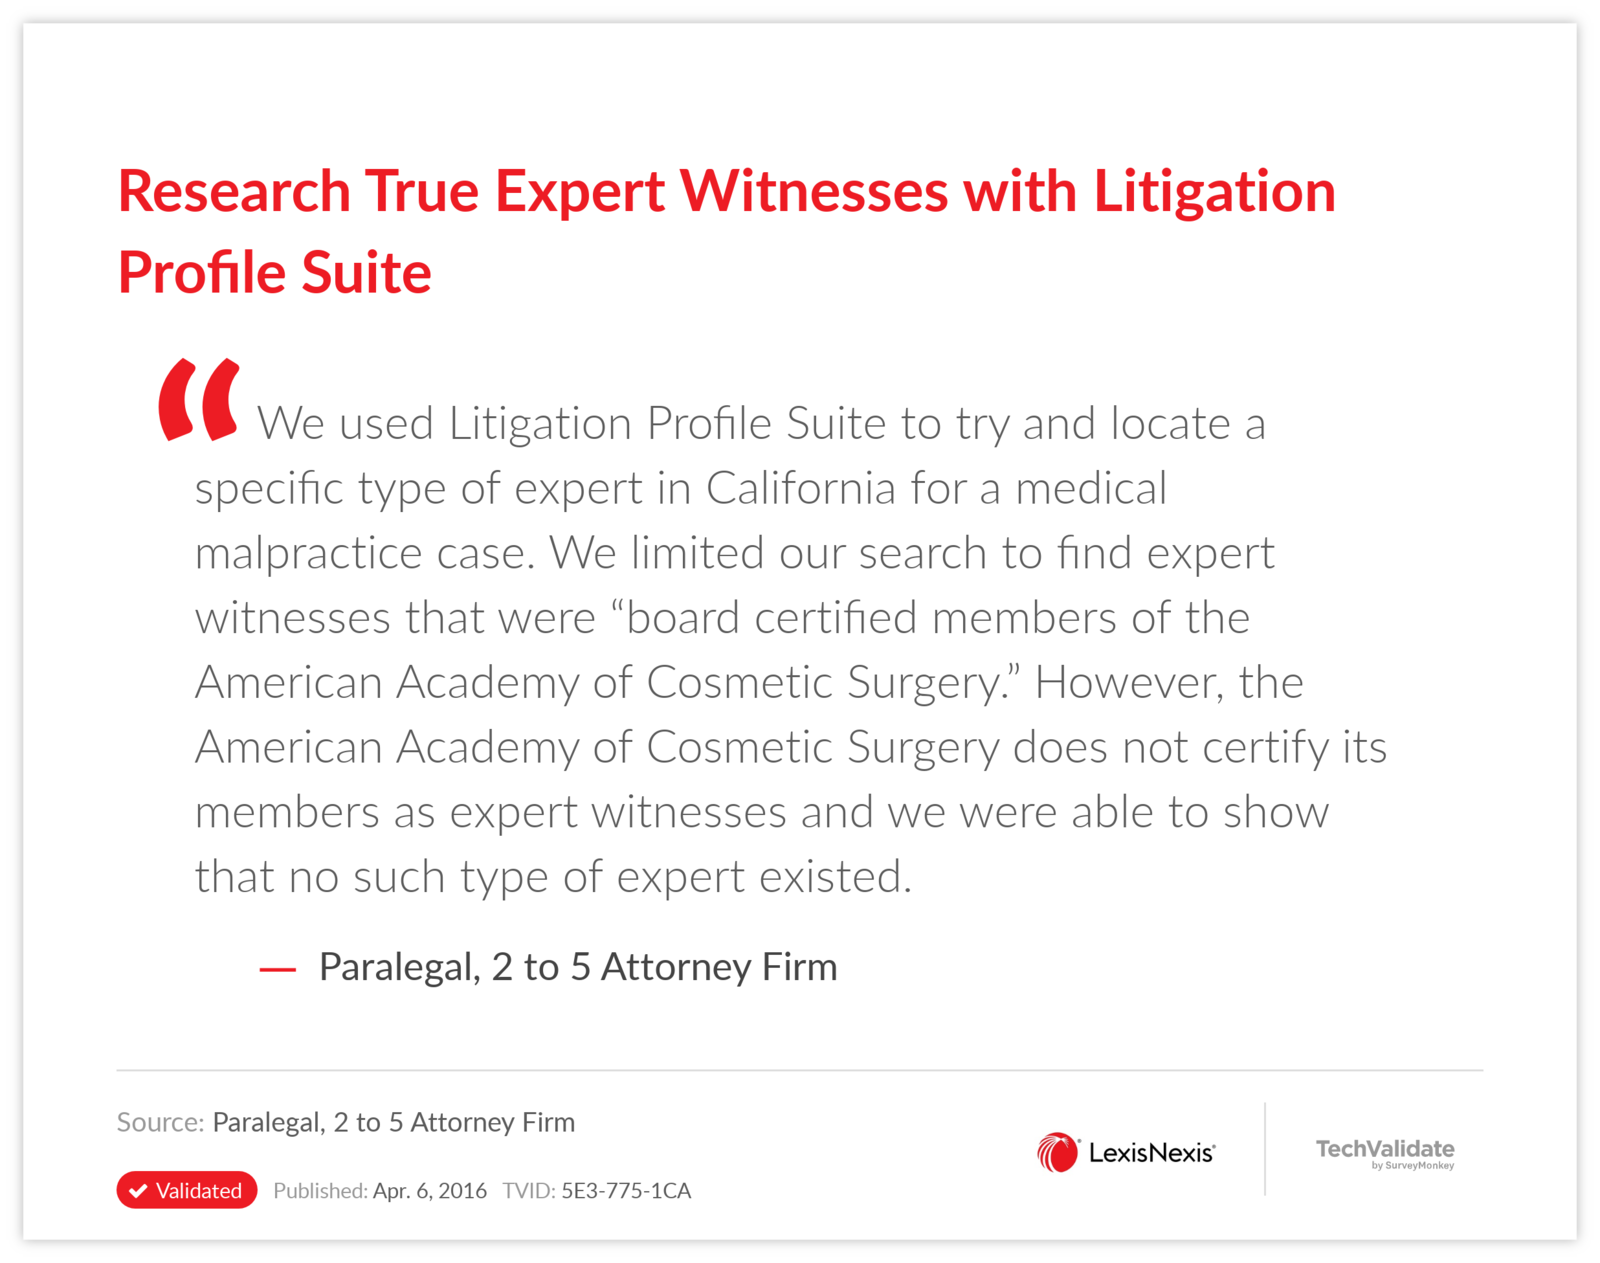 Research True Expert Witnesses with Litigation Profile Suite